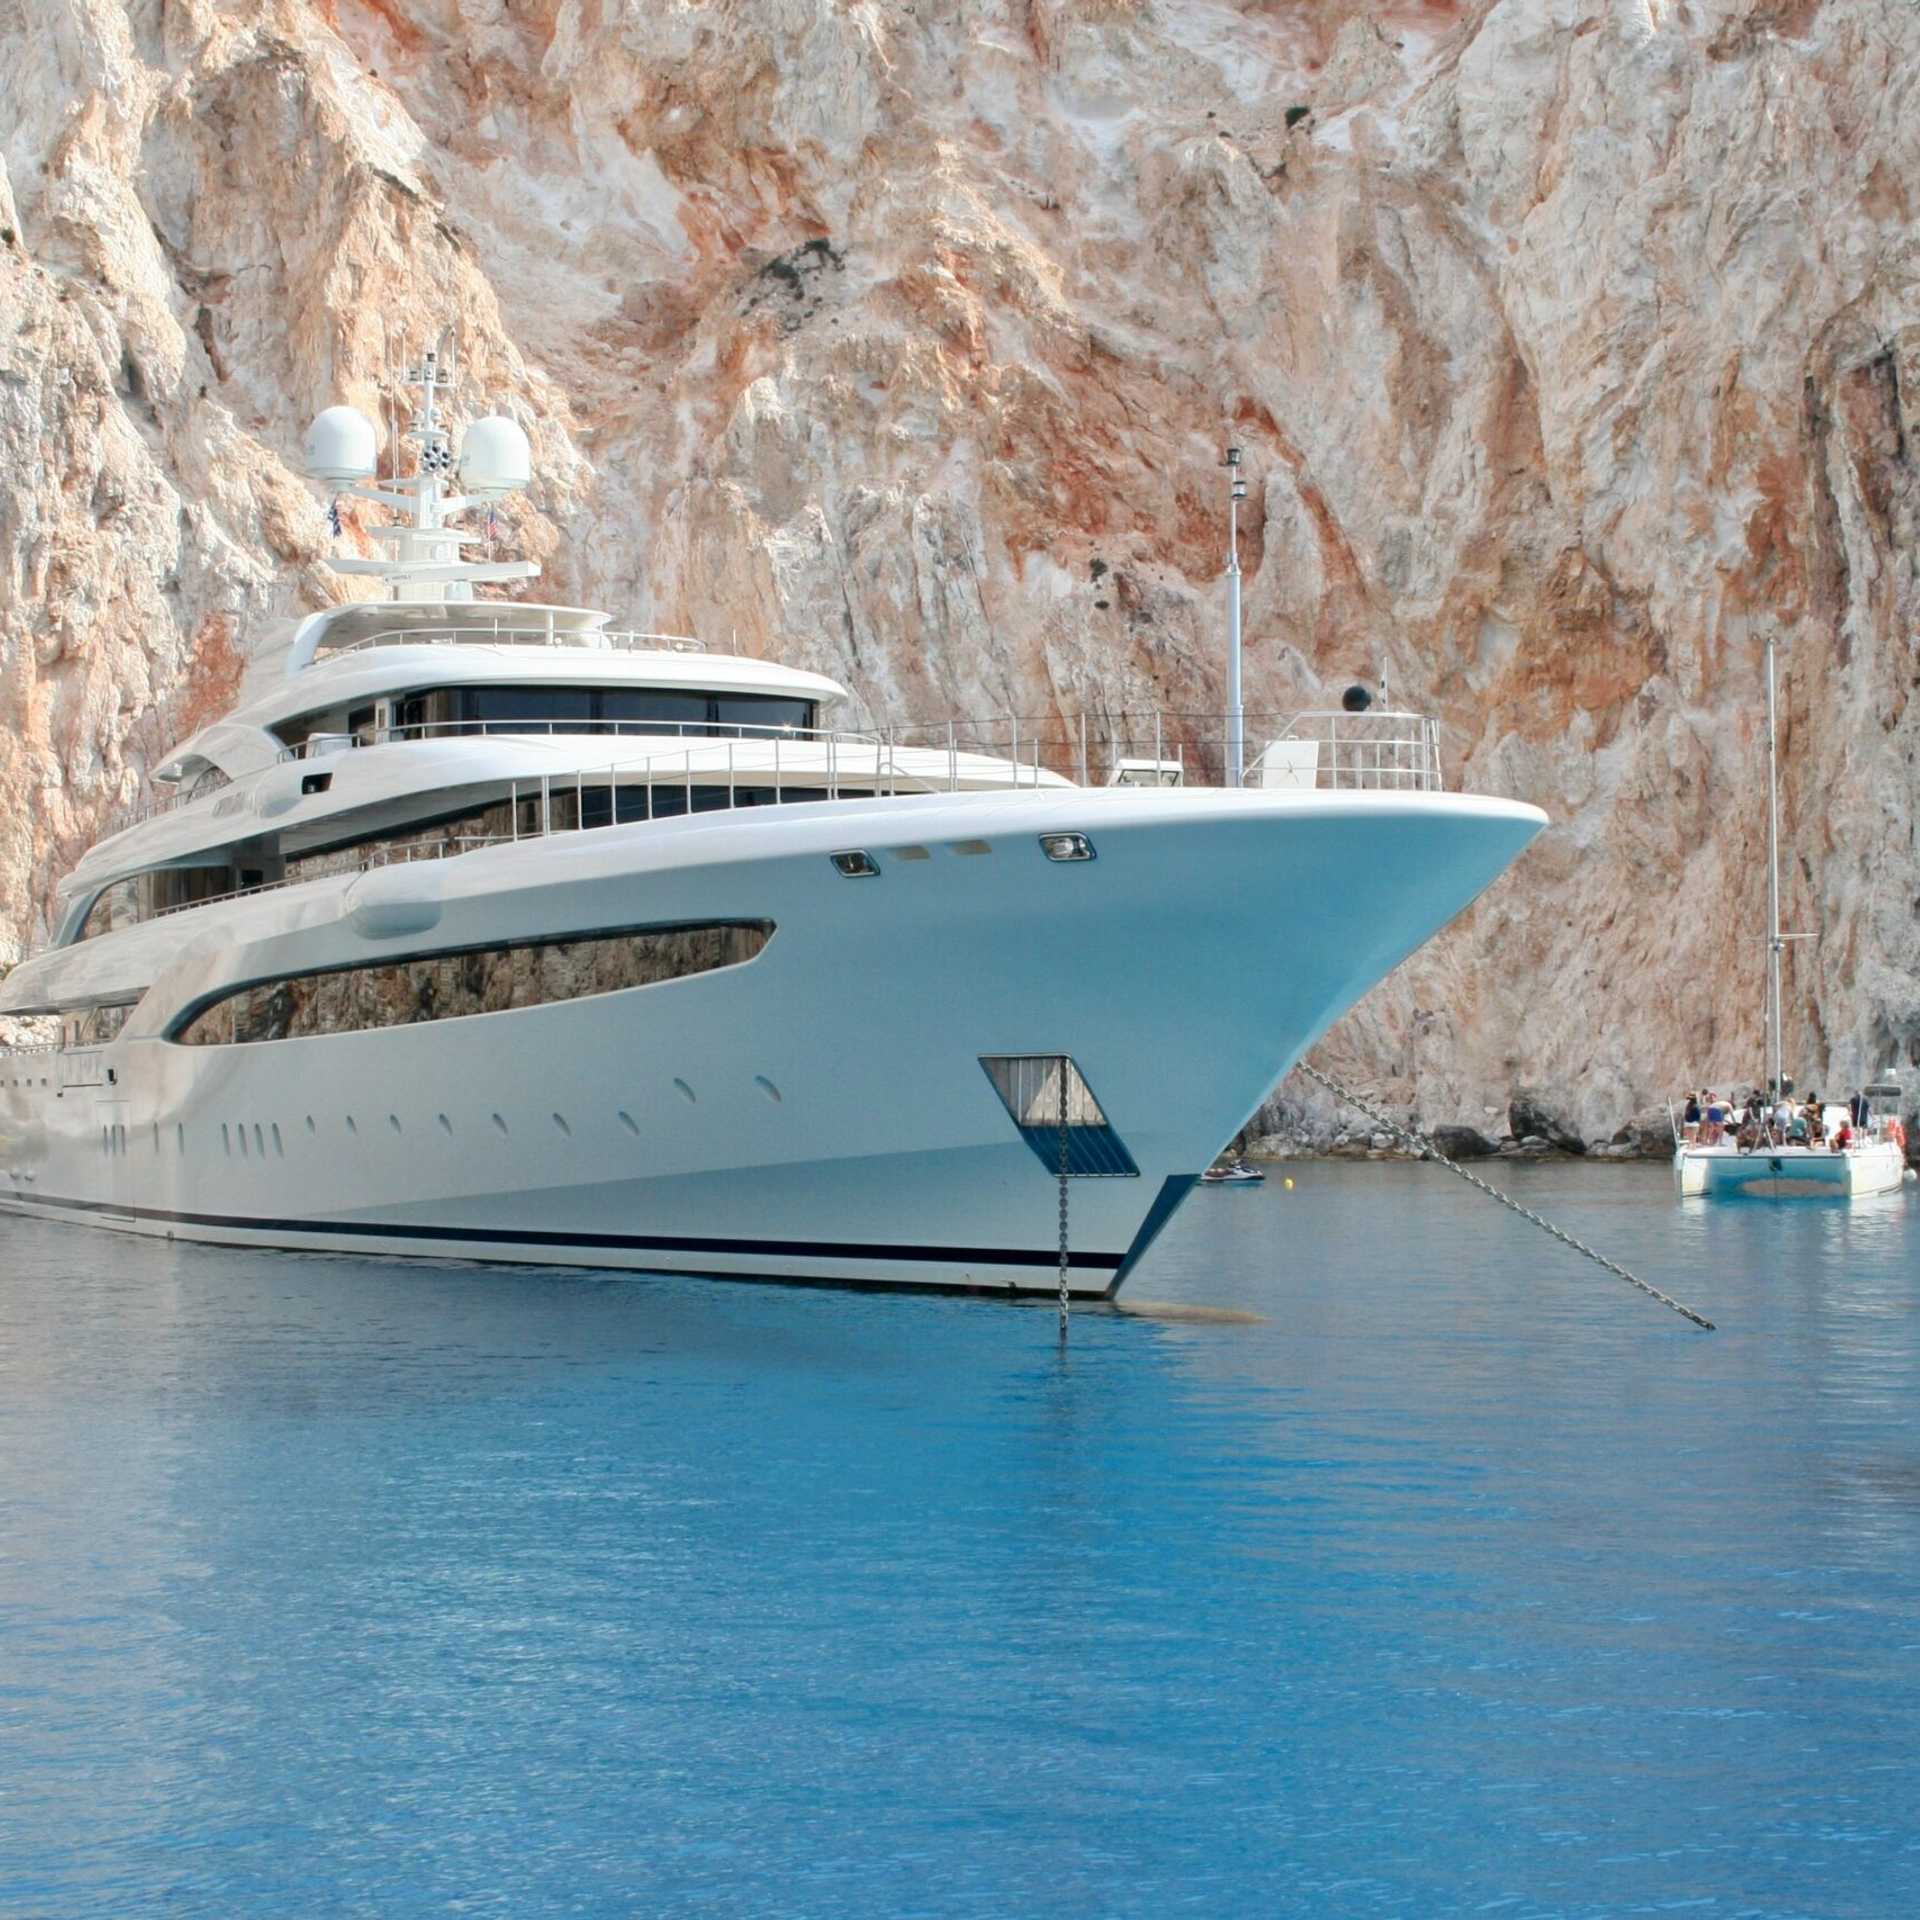 A luxury super yacht anchored near a white coast with crystal blue water.